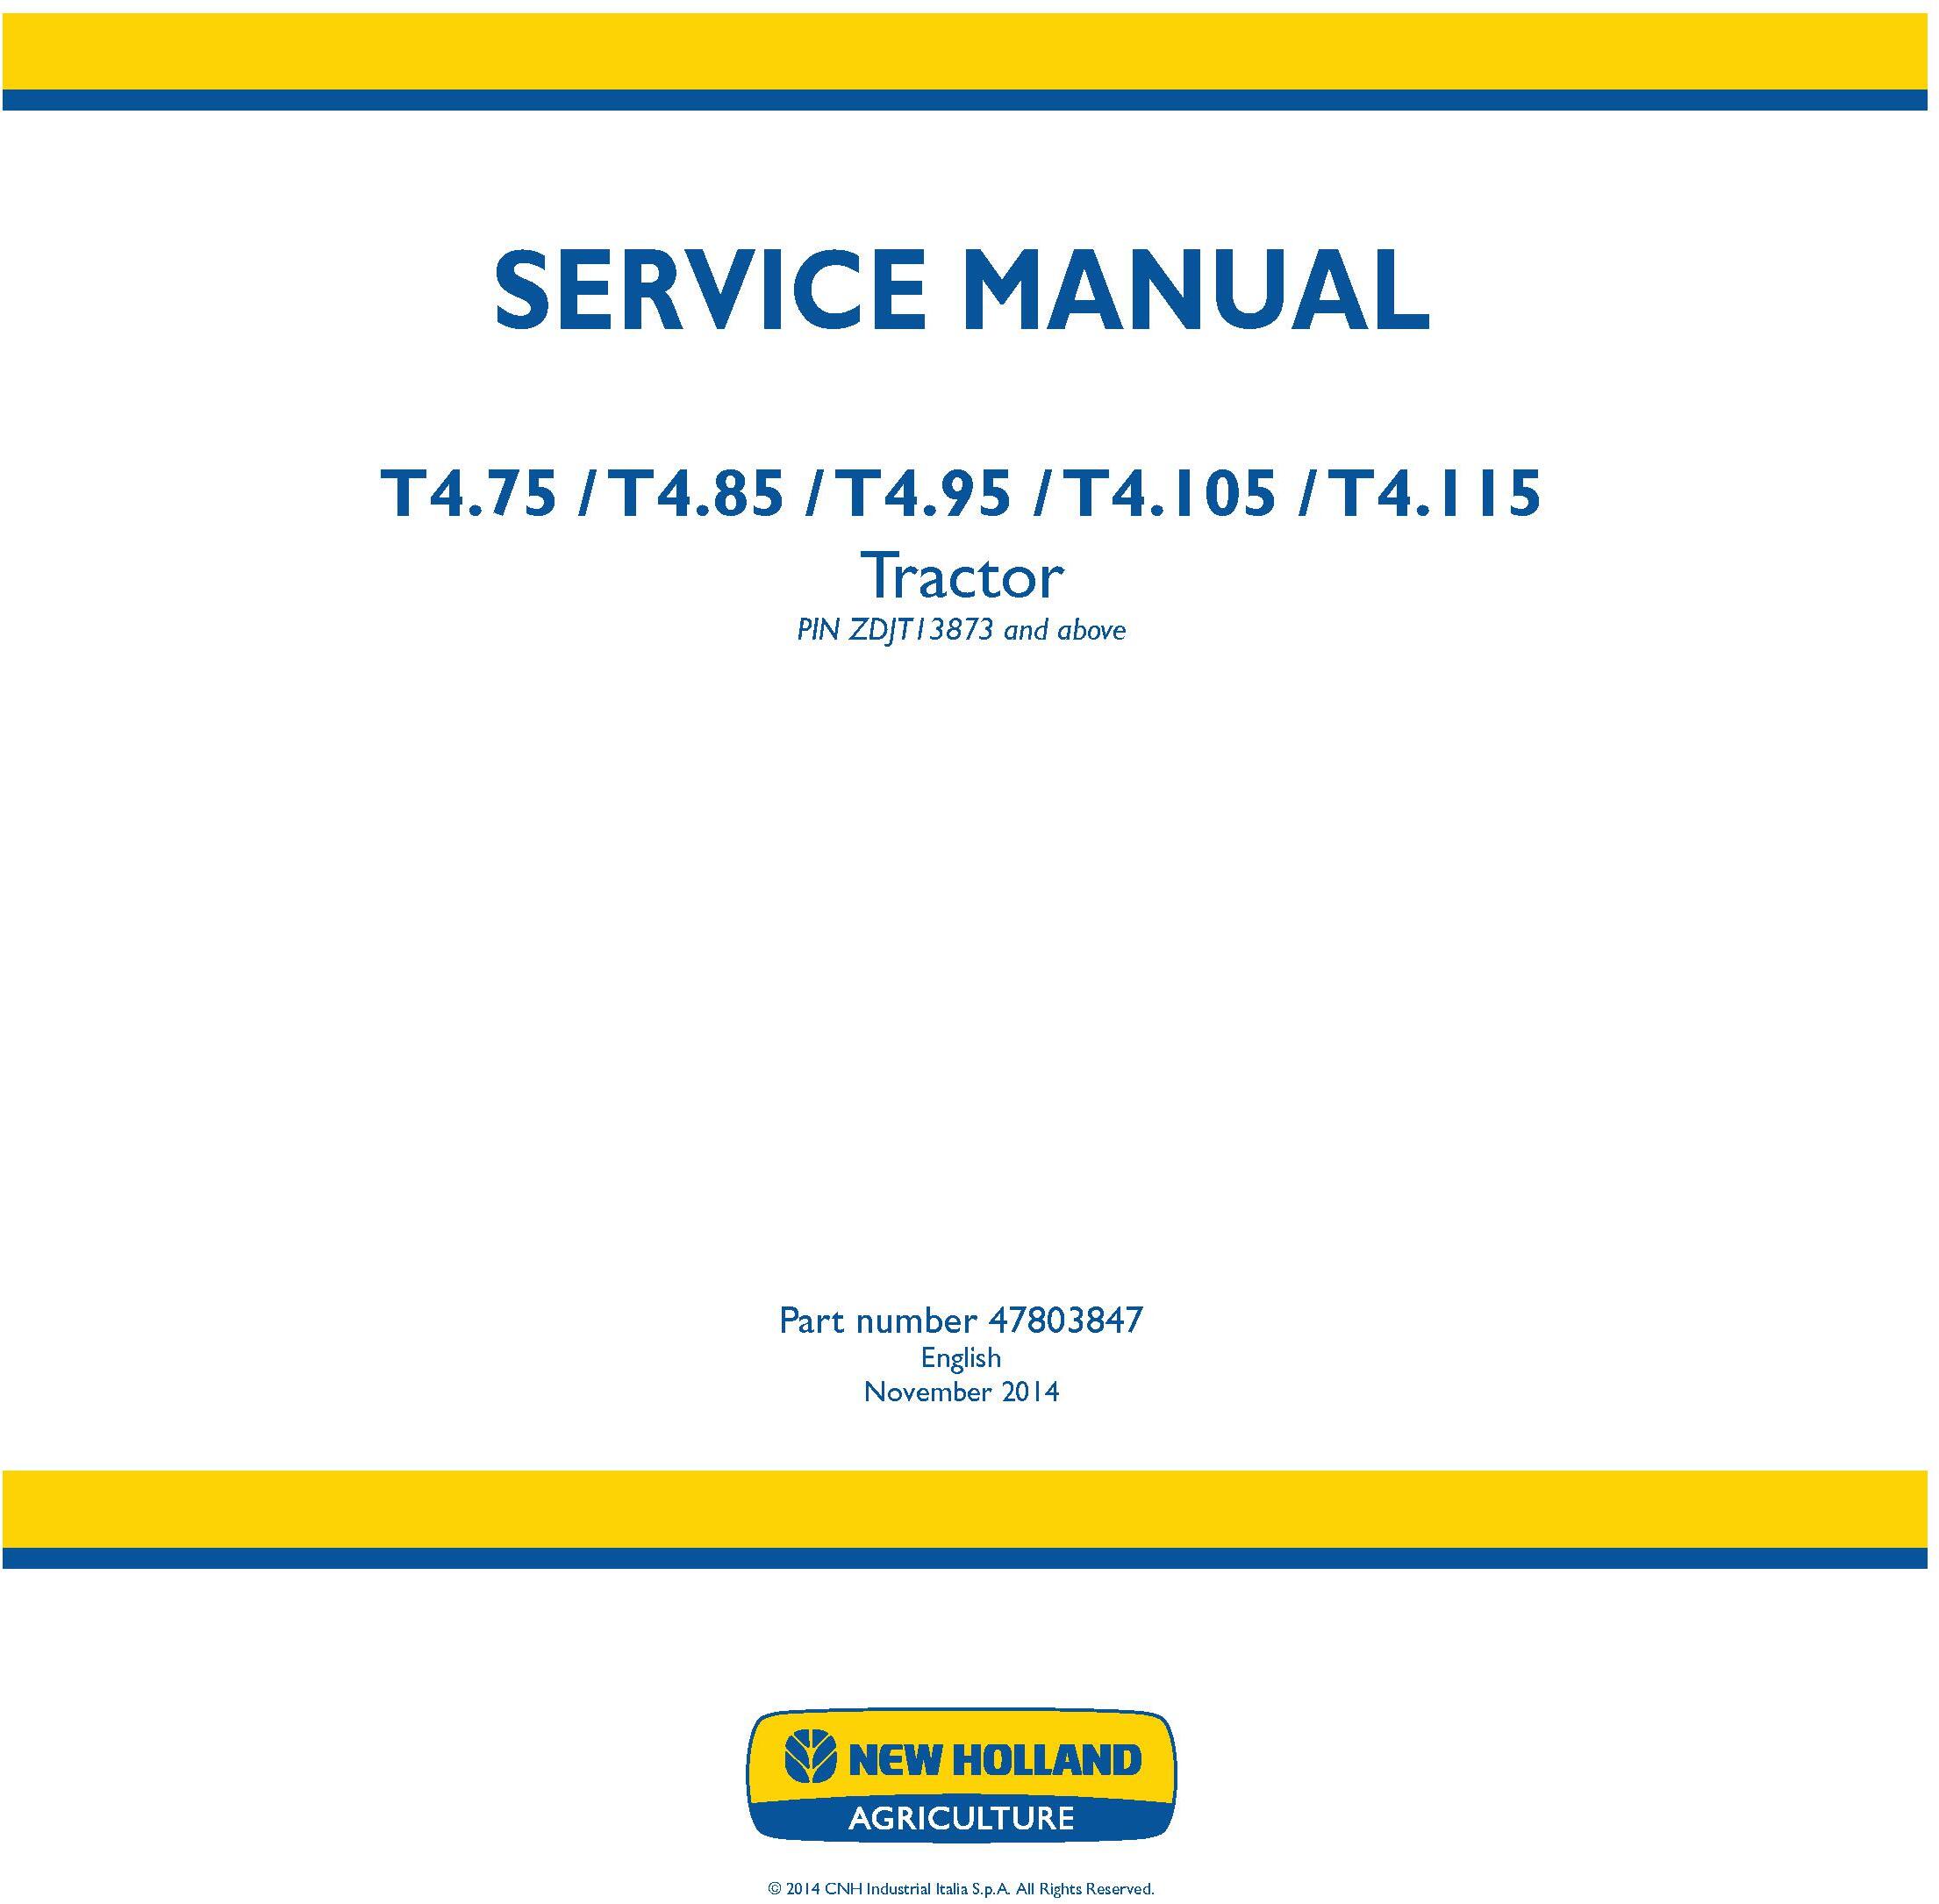 New Holland T4.75, T4.85, T4.95, T4.105, T4.115 Tractor Service Manual - 19417